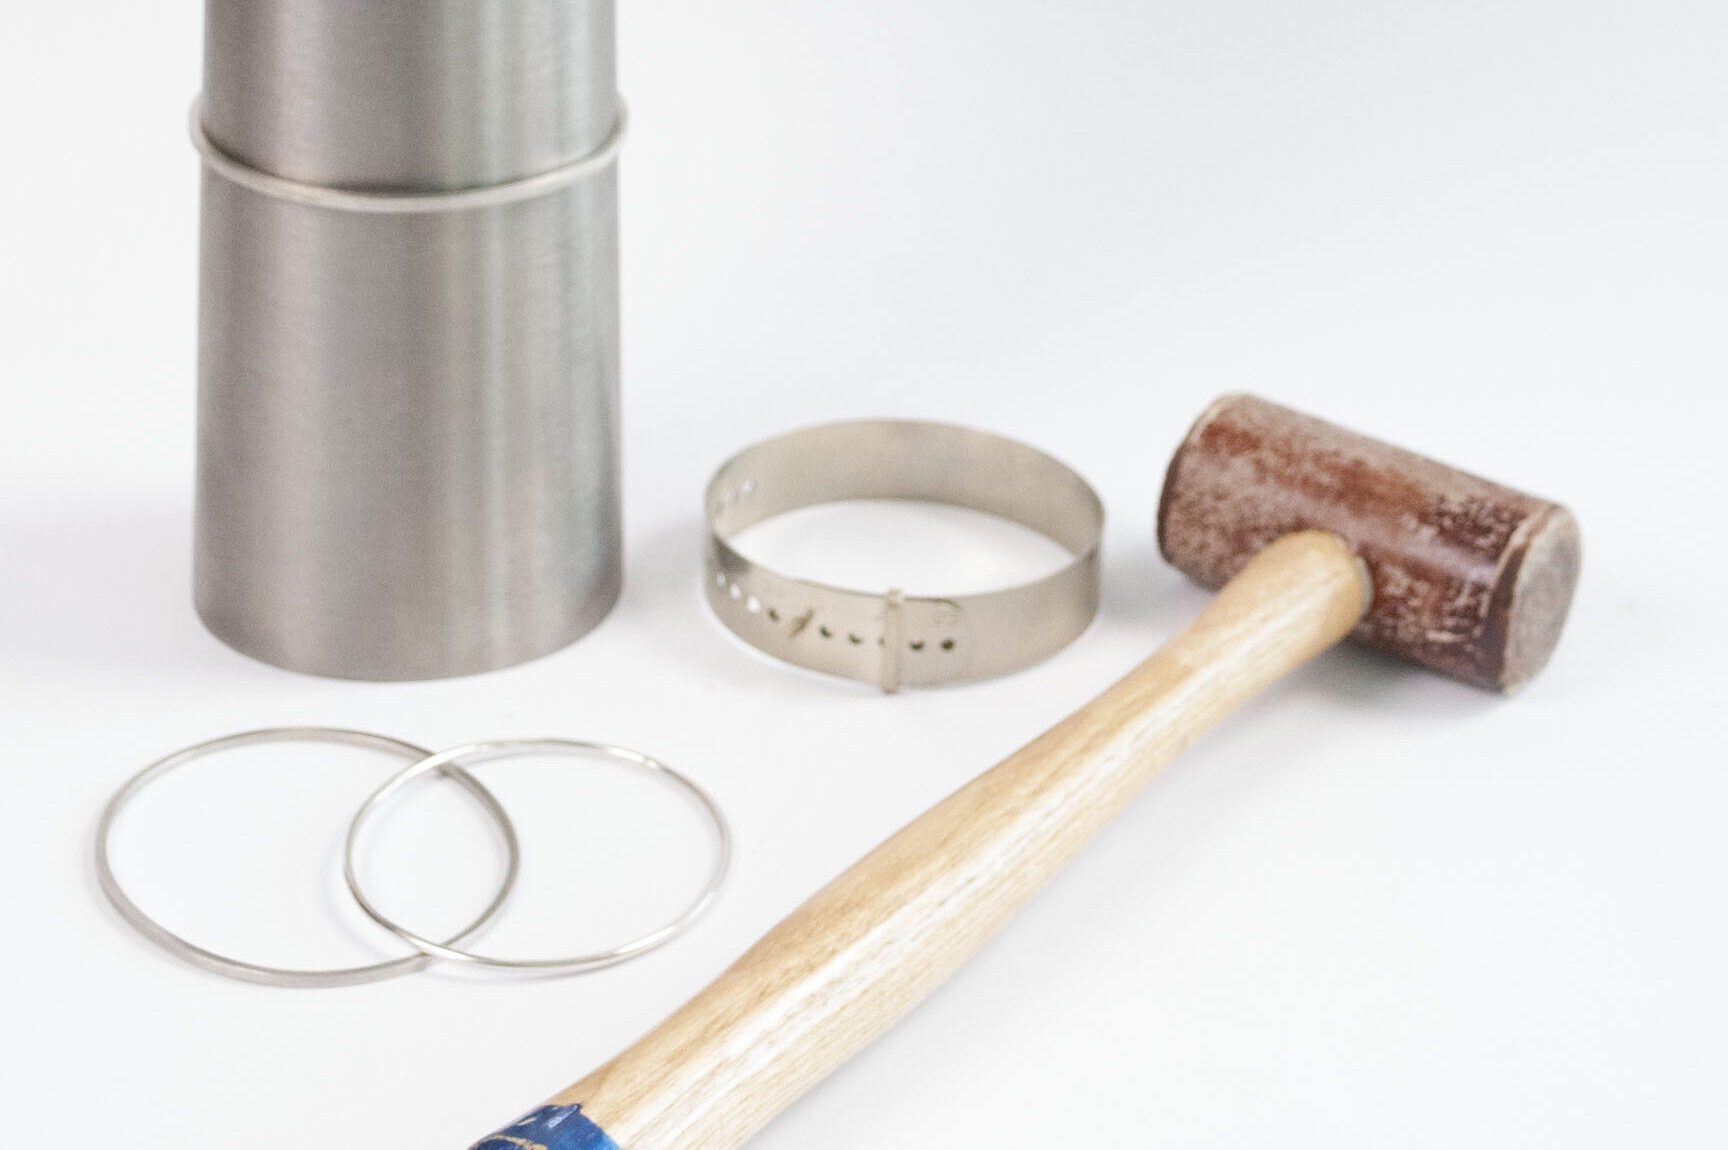 Tools and materials used to make a silver bangle